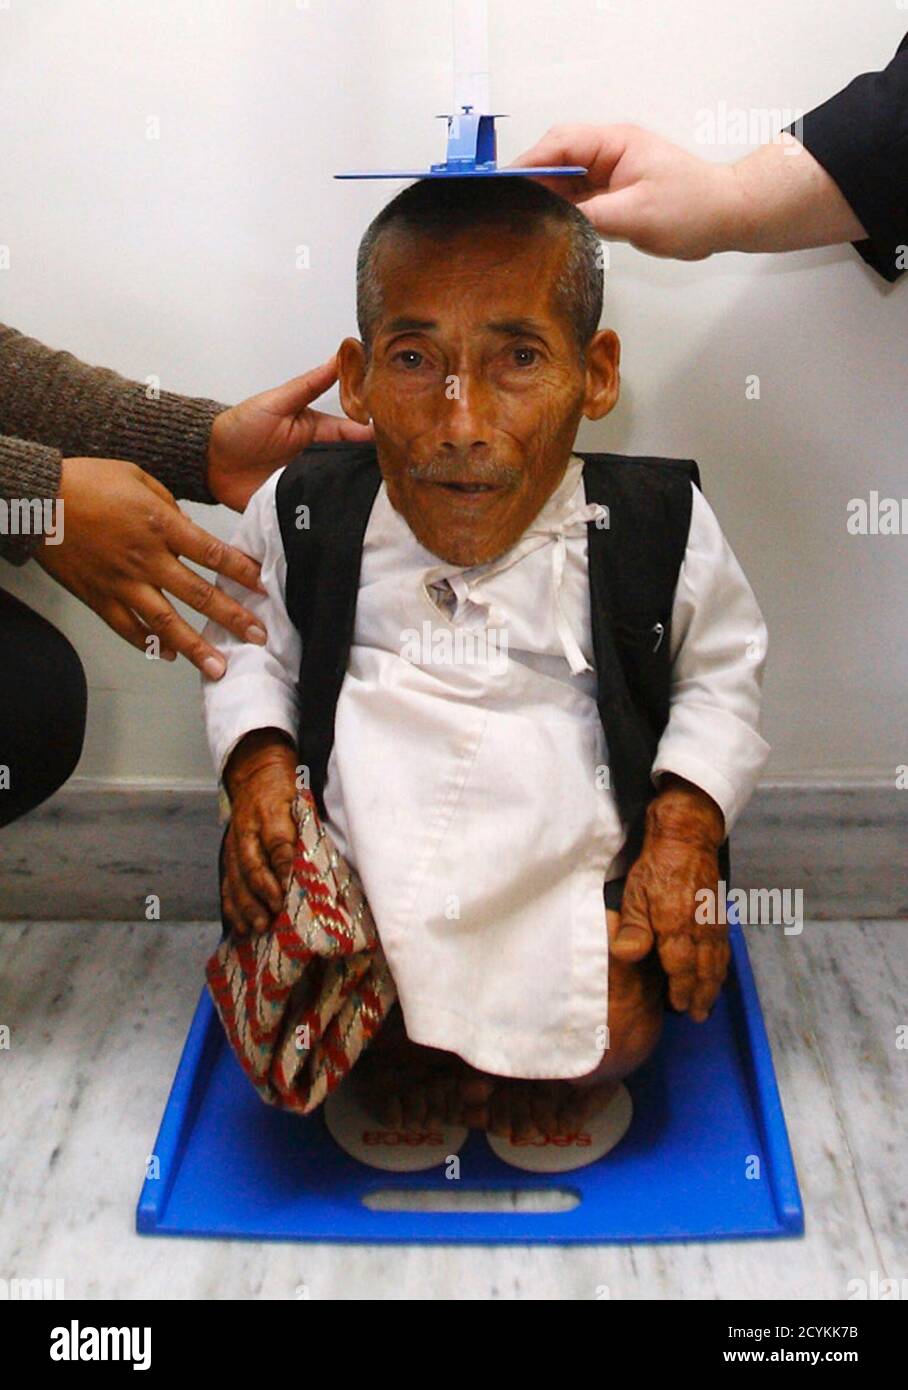 Chandra Bahadur Dangi, 72, who claims to be the world's shortest man  standing at a height of 22 inches (56 centimeters), is measured by the  Editor-in-Chief of Guinness World Record Craig Glenday (